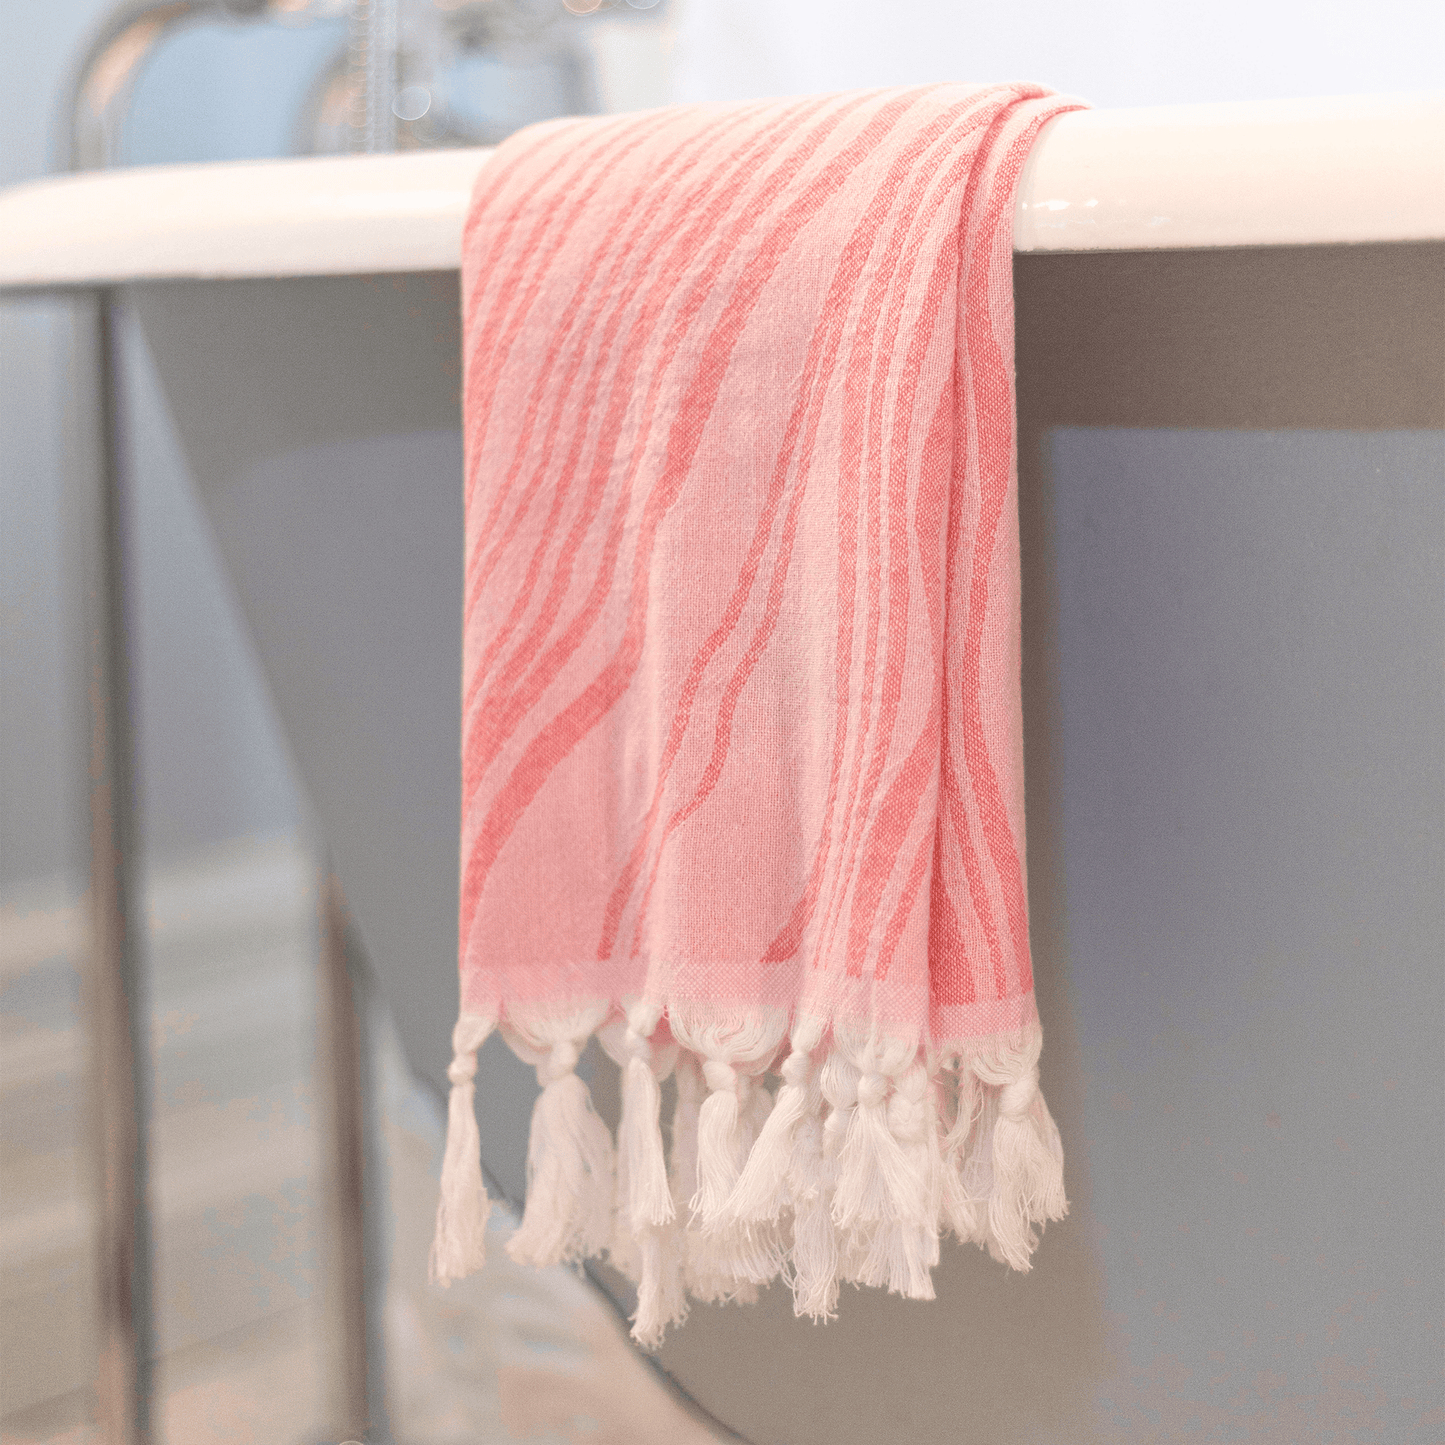 Pink Turkish hand towel hanging in the bath